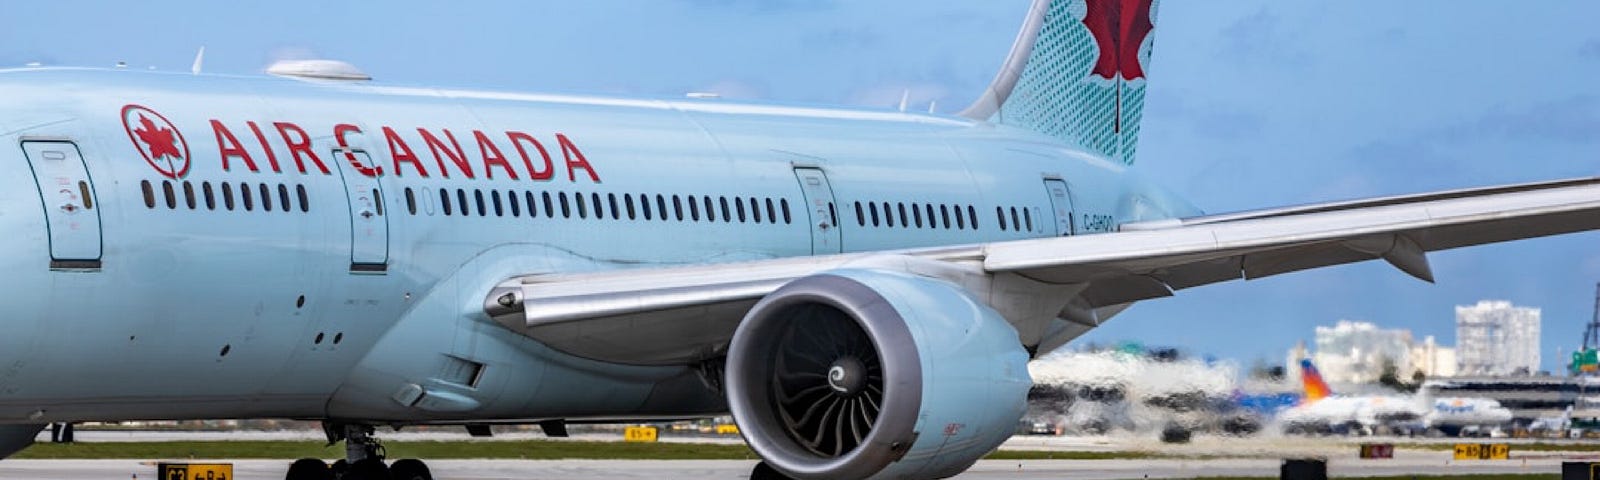 A plane painted in light blue with the red “Air Canada” lettering on the side is parked at an airport tarmac.